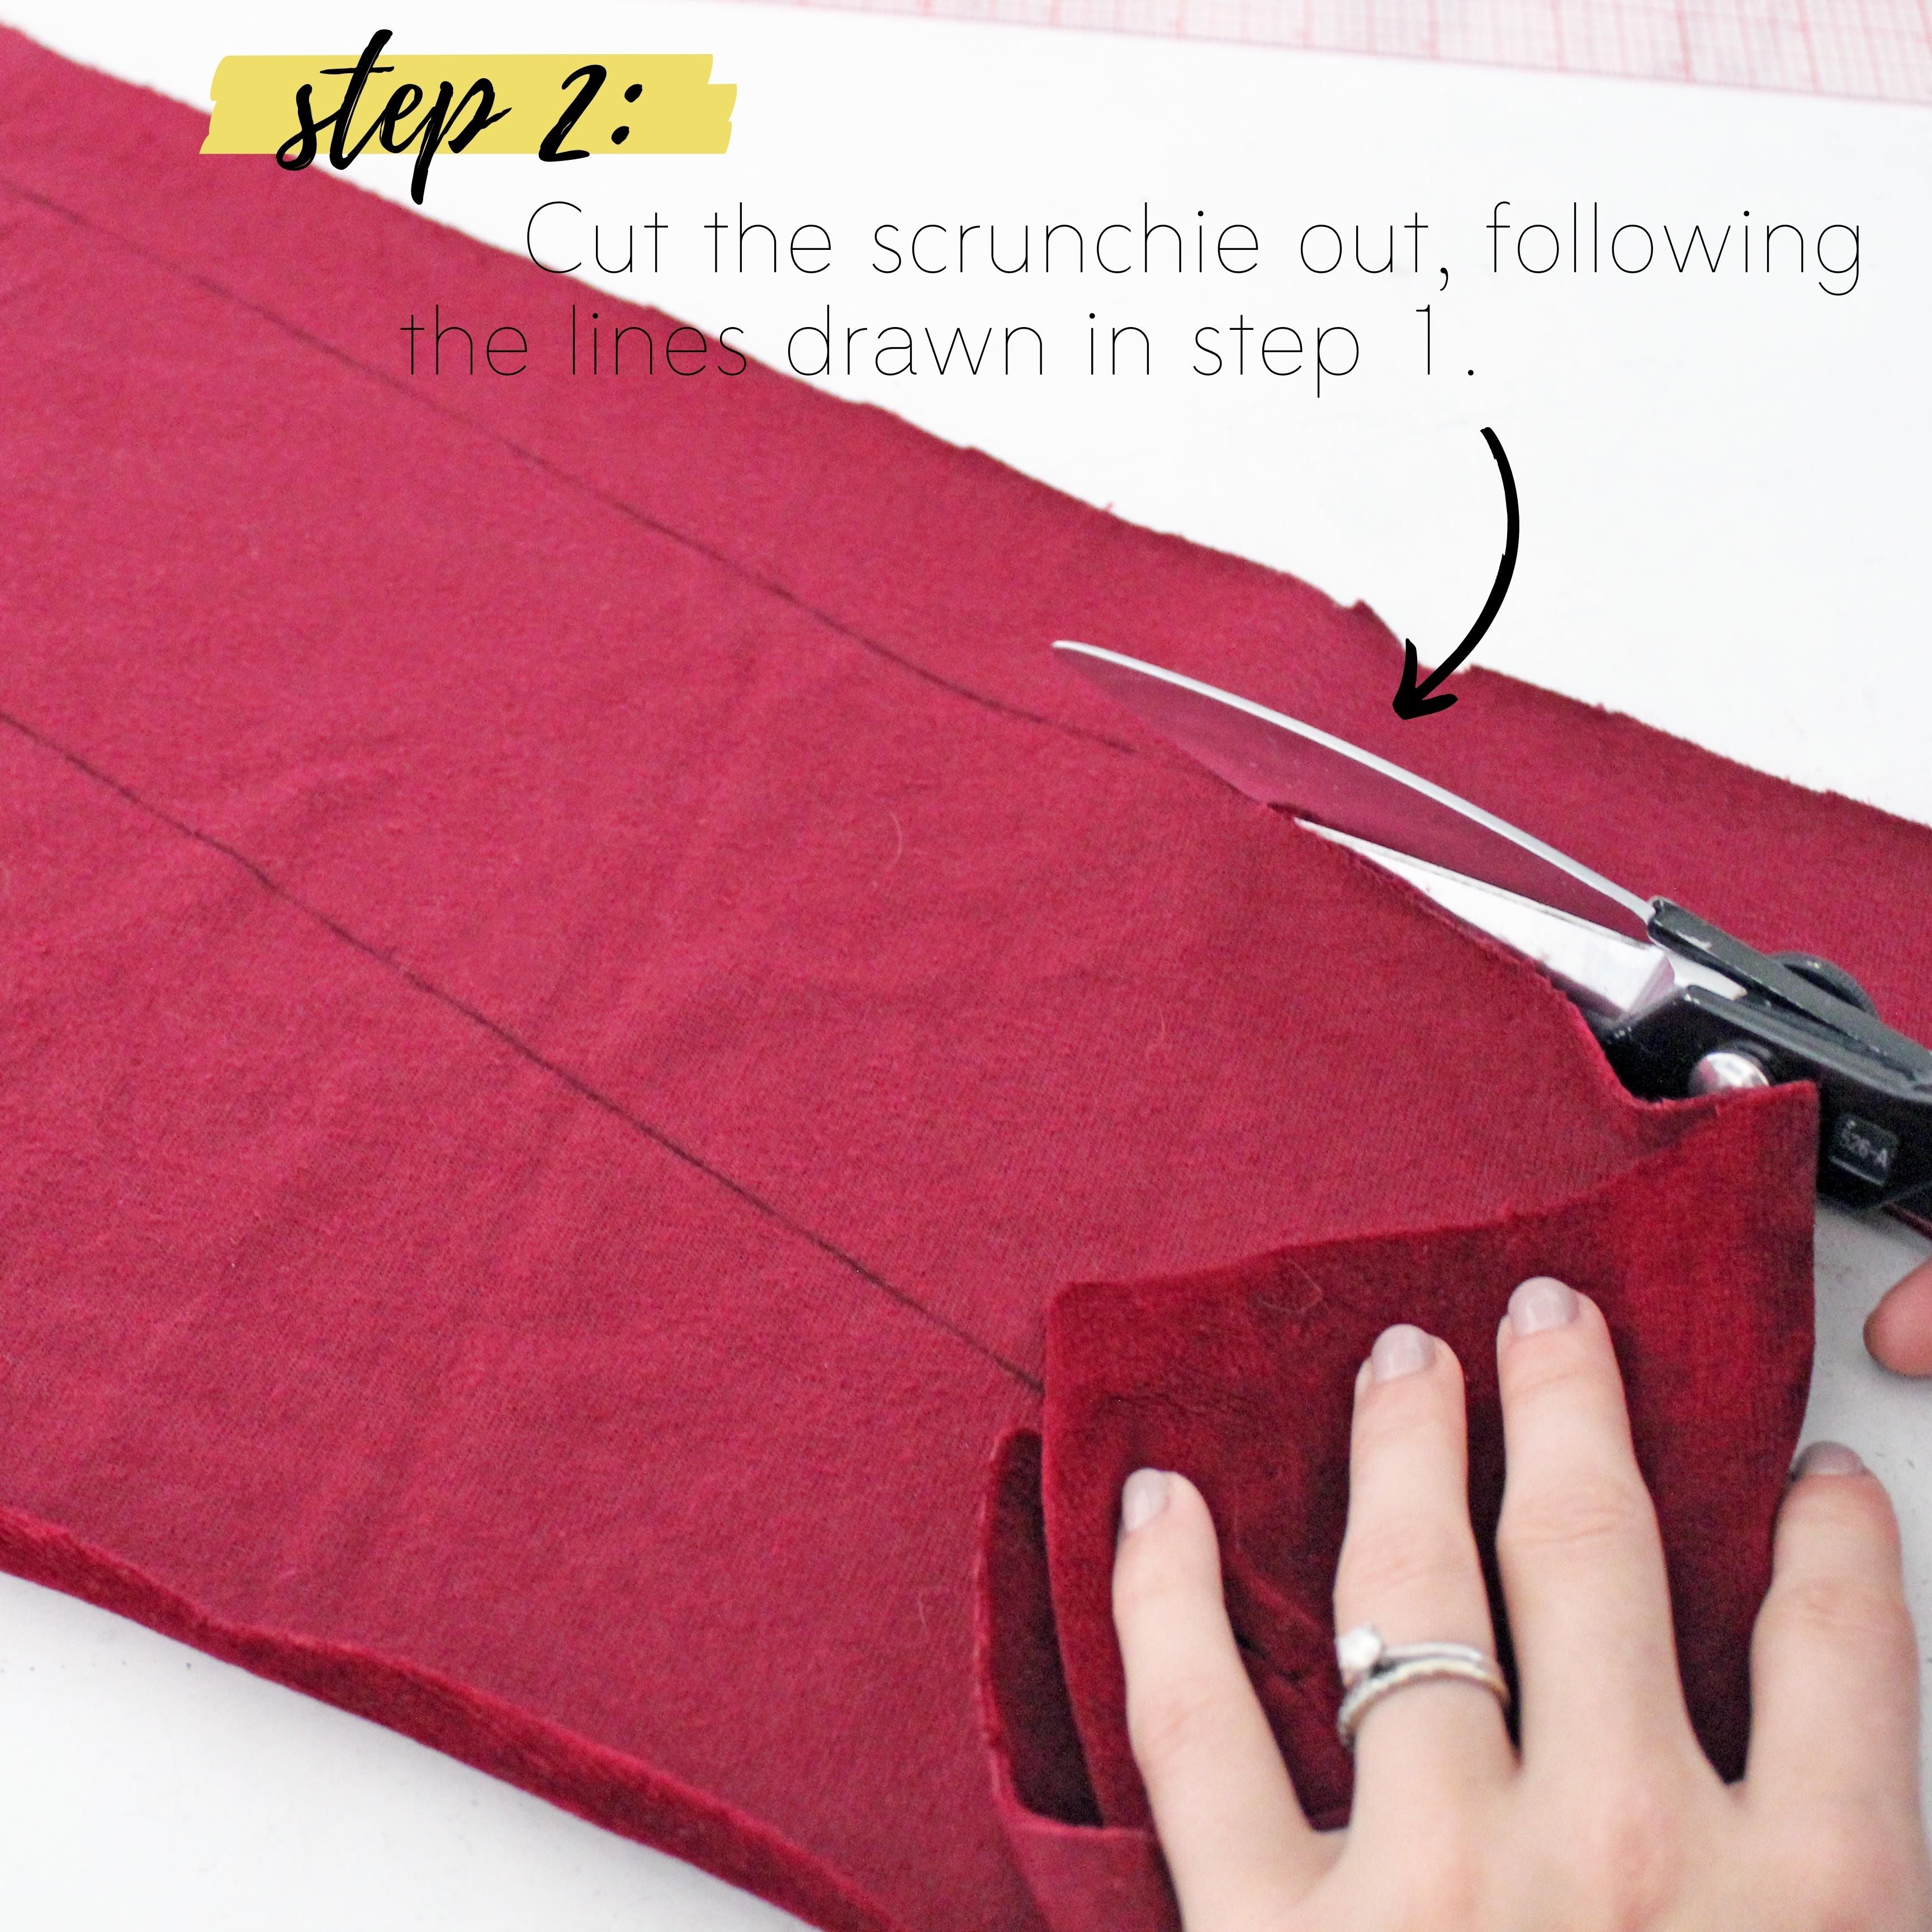 How To Make A Scrunchie DIY Sewing Tutorial: Step 2